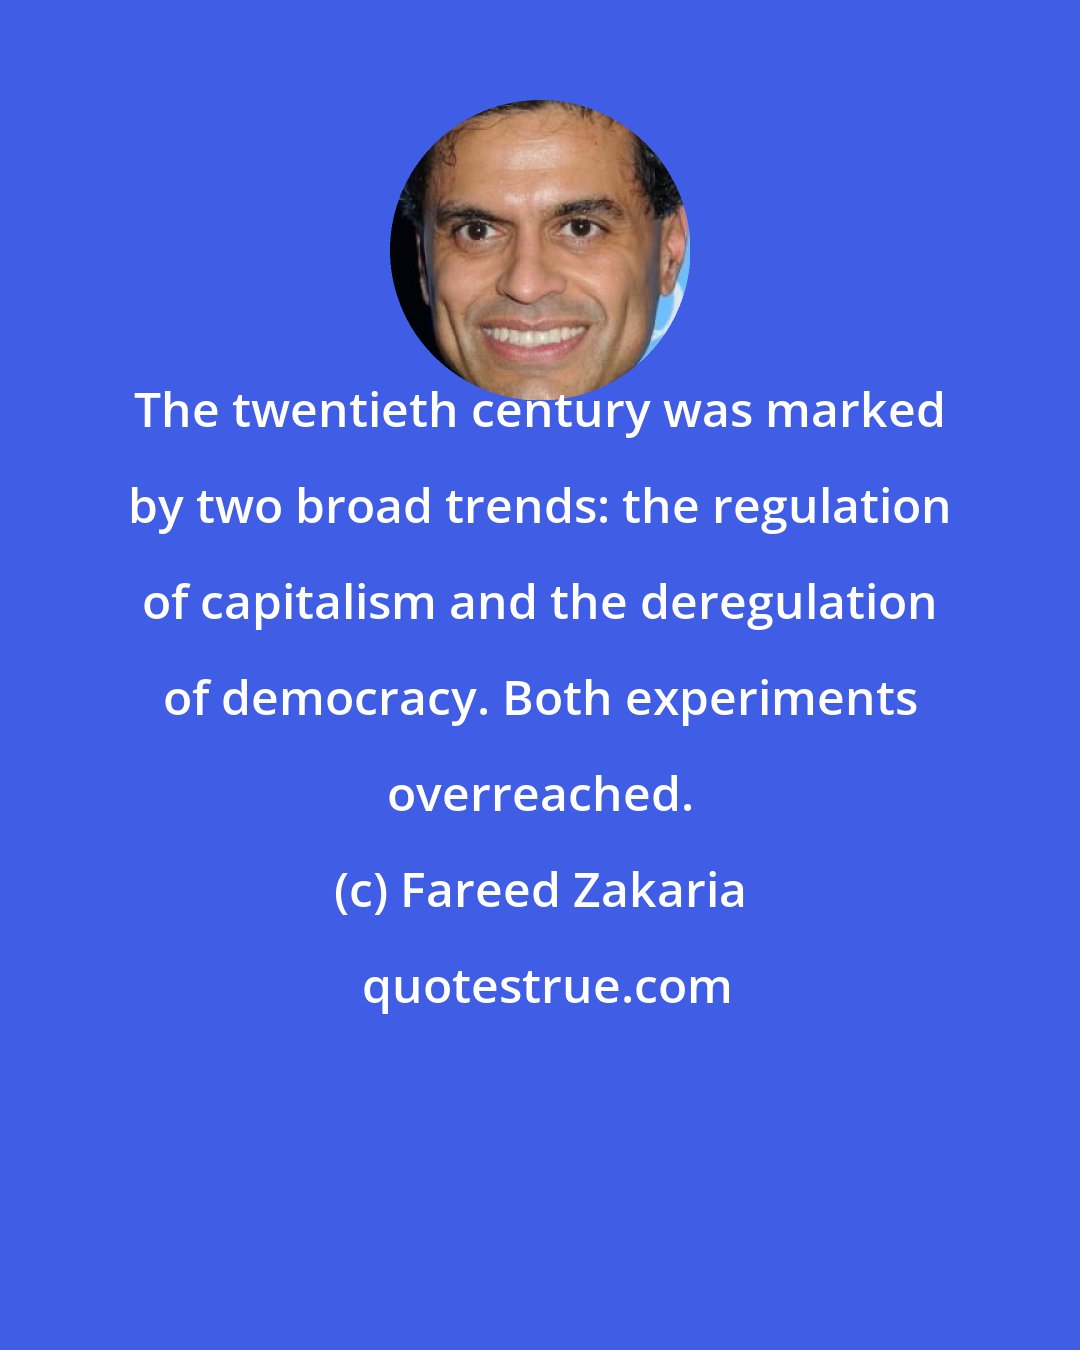 Fareed Zakaria: The twentieth century was marked by two broad trends: the regulation of capitalism and the deregulation of democracy. Both experiments overreached.